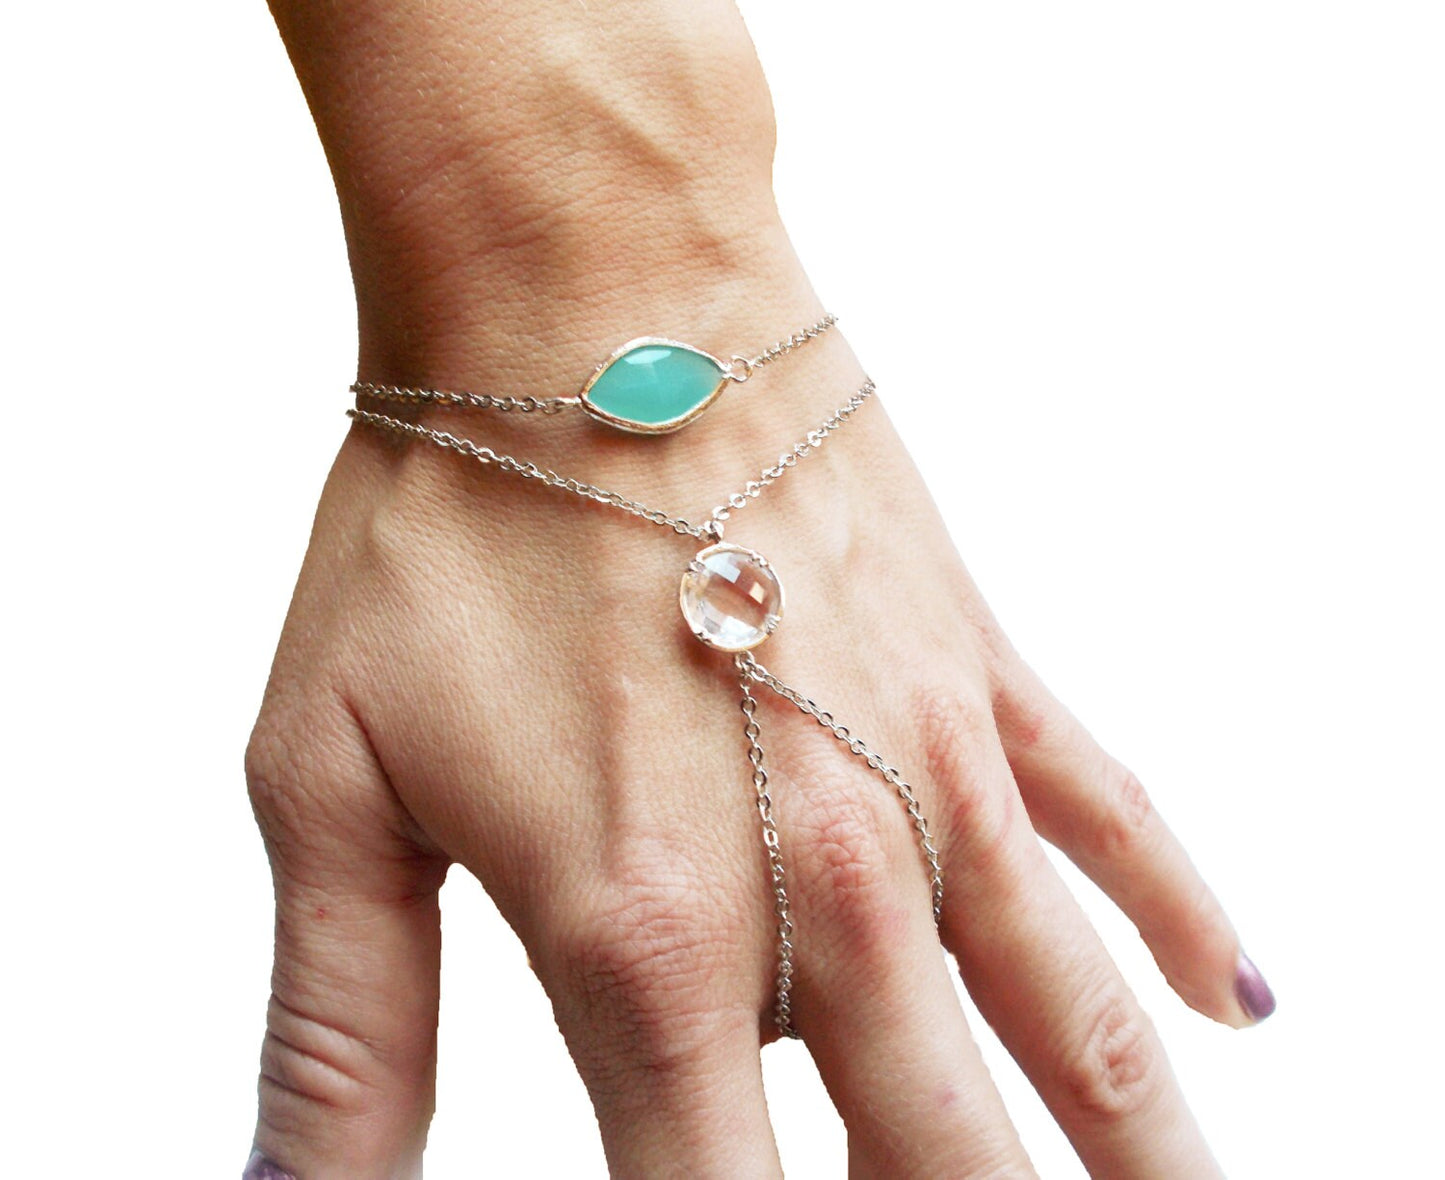 Silver Slave Bracelet with Mint and Clear Crystal Accent - Clear Stone Silver Hand Chain - Gemstone Slave bracelet - Hand Harness